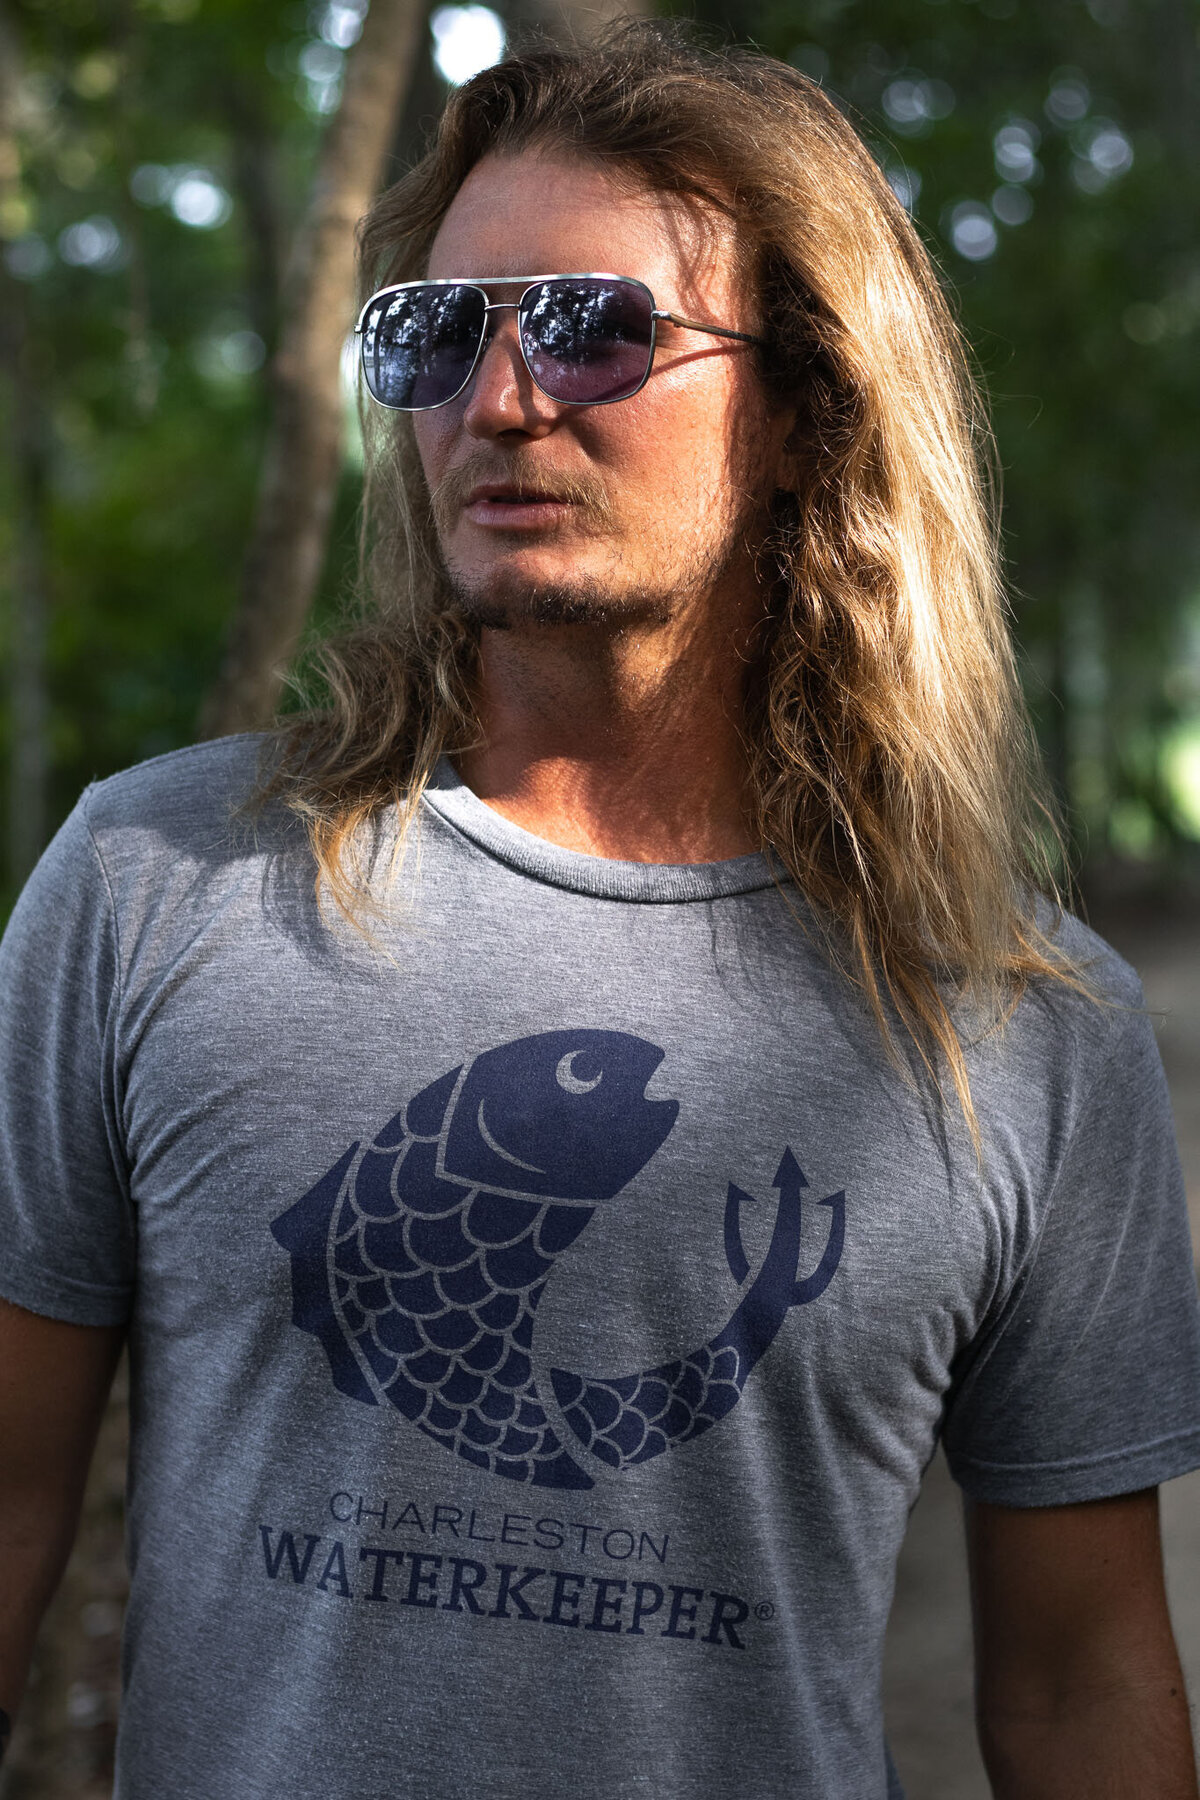 Andre Brierre Jr. a Charleston, SC fishing charter captain and boyfriend to Jaye Everly, a Charleston lifestyle influencer